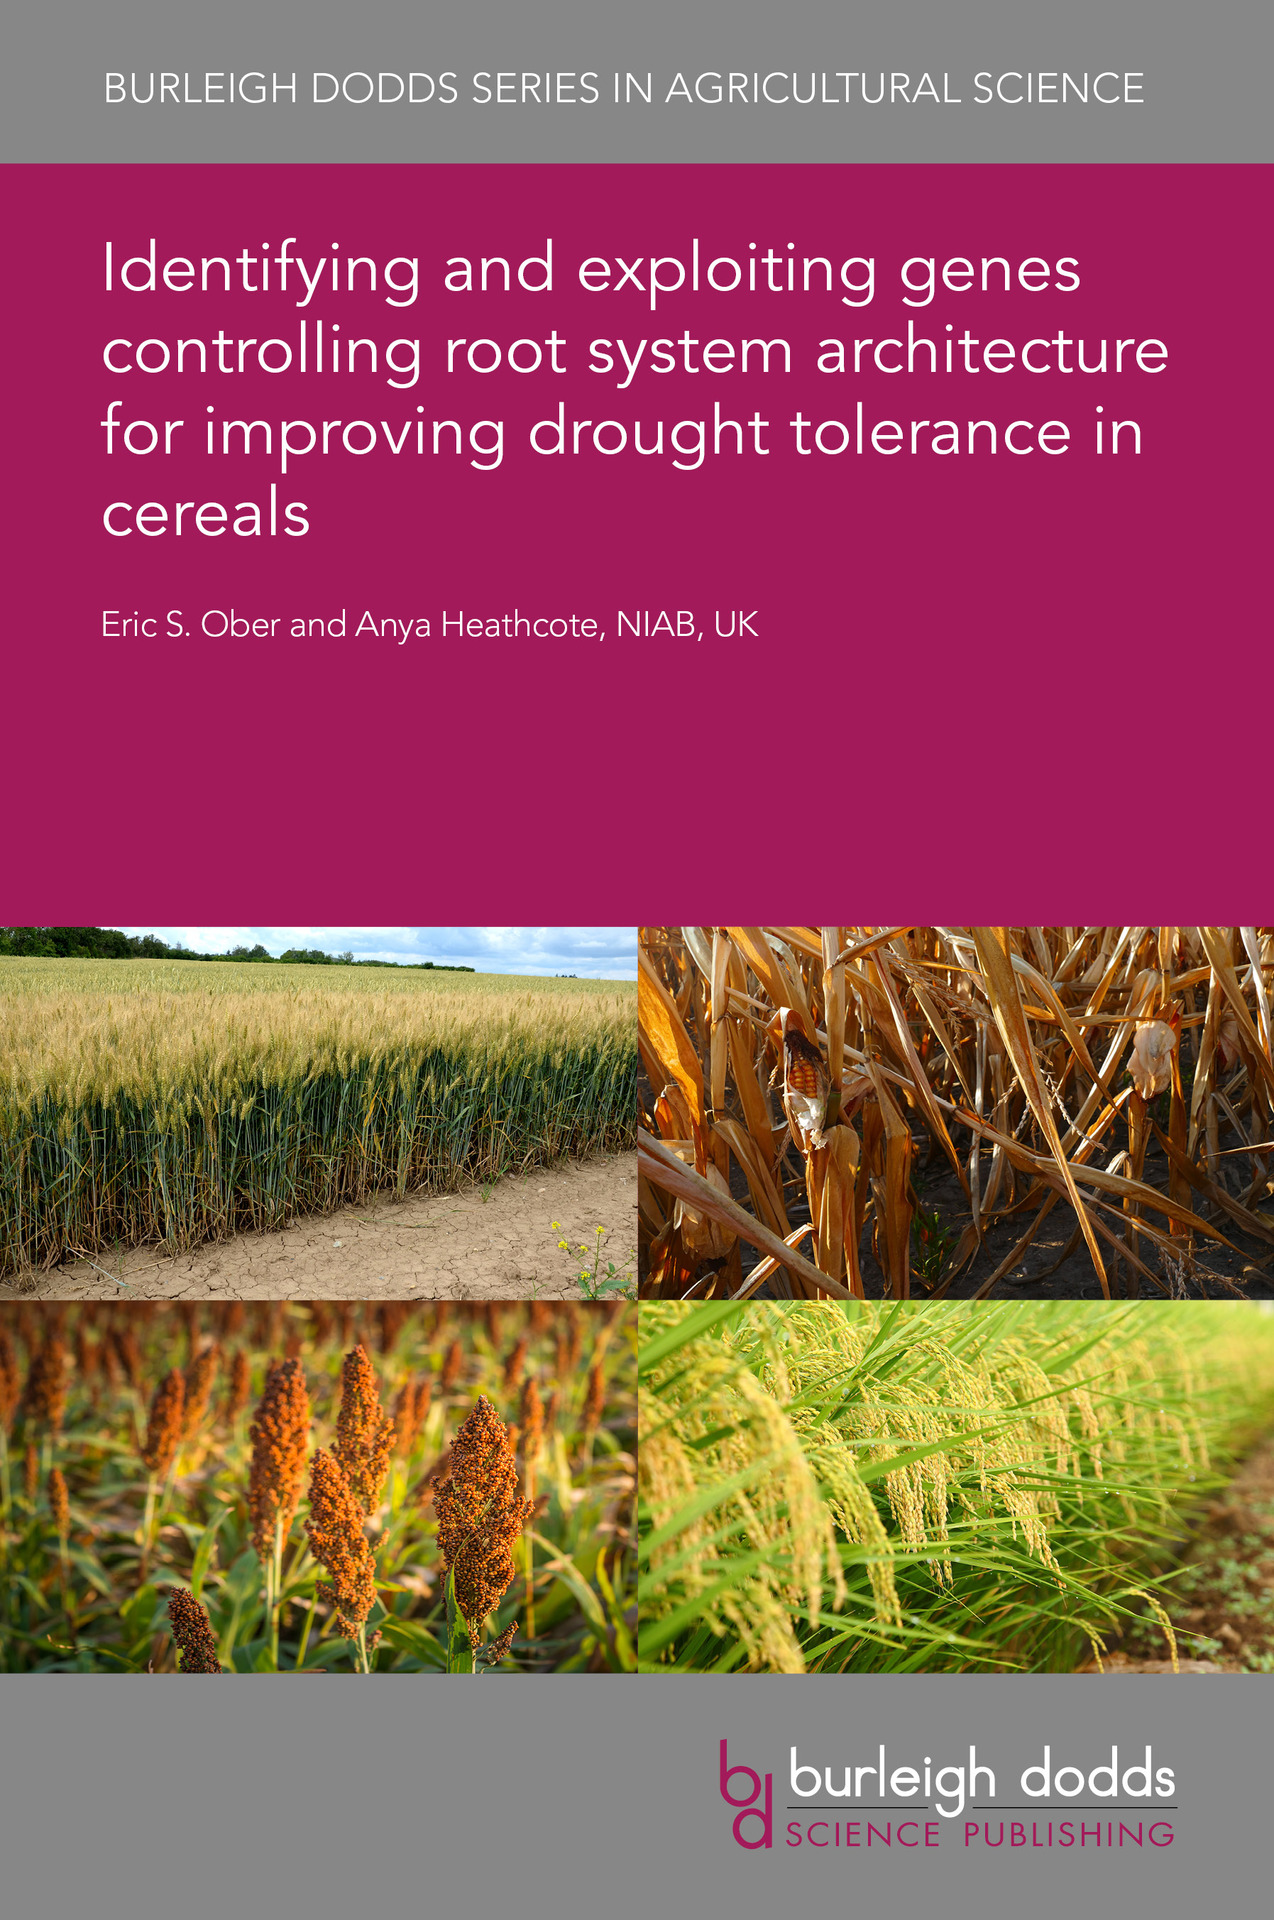 Identifying and exploiting genes controlling root system architecture for improving drought tolerance in cereals